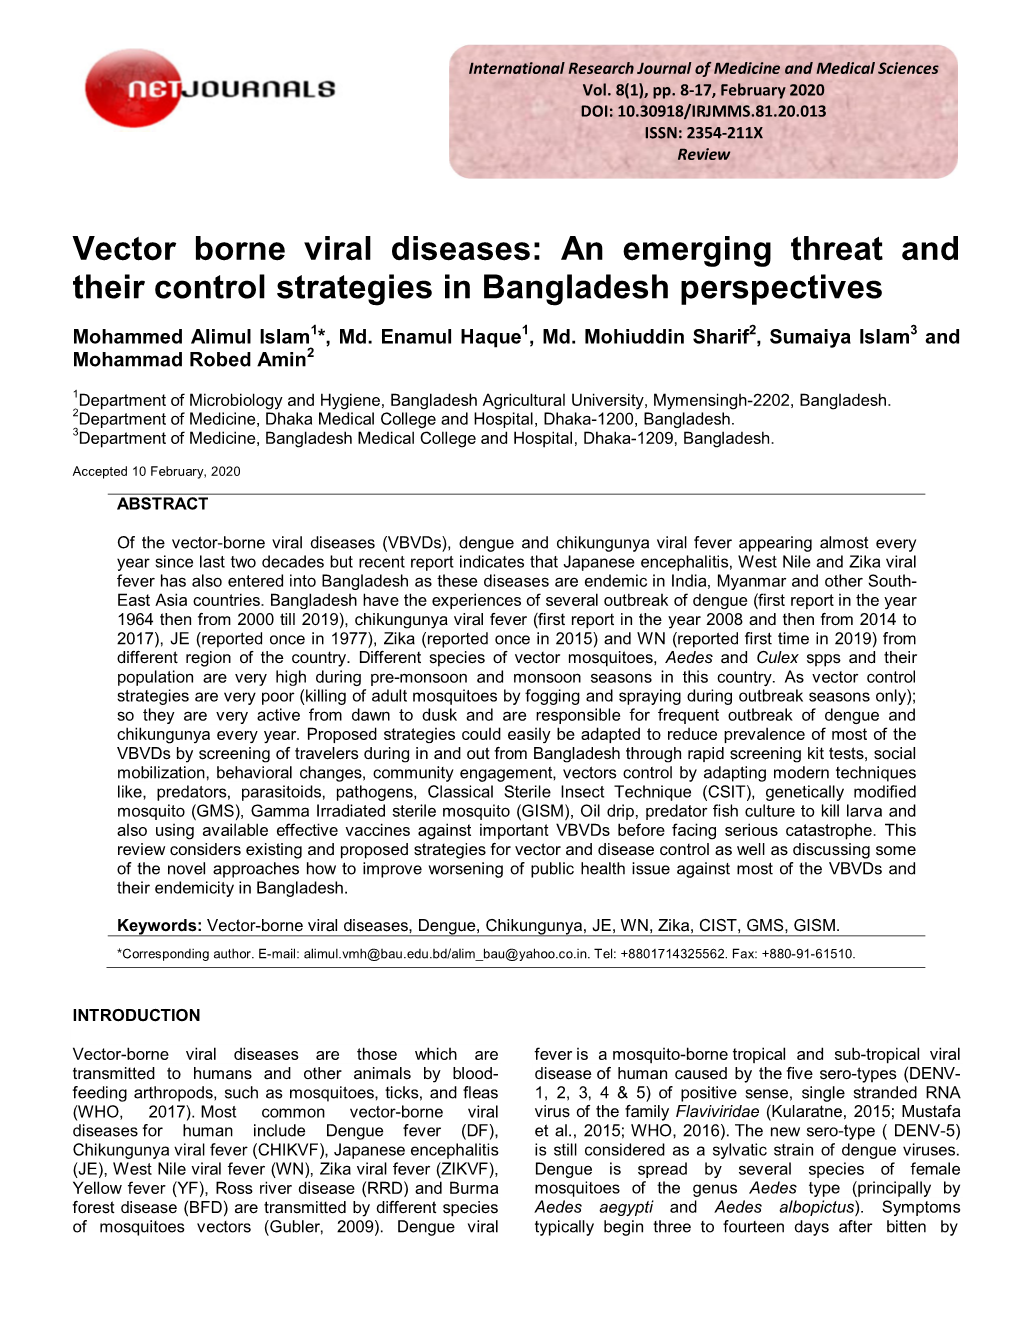 Vector Borne Viral Diseases: an Emerging Threat and Their Control Strategies in Bangladesh Perspectives